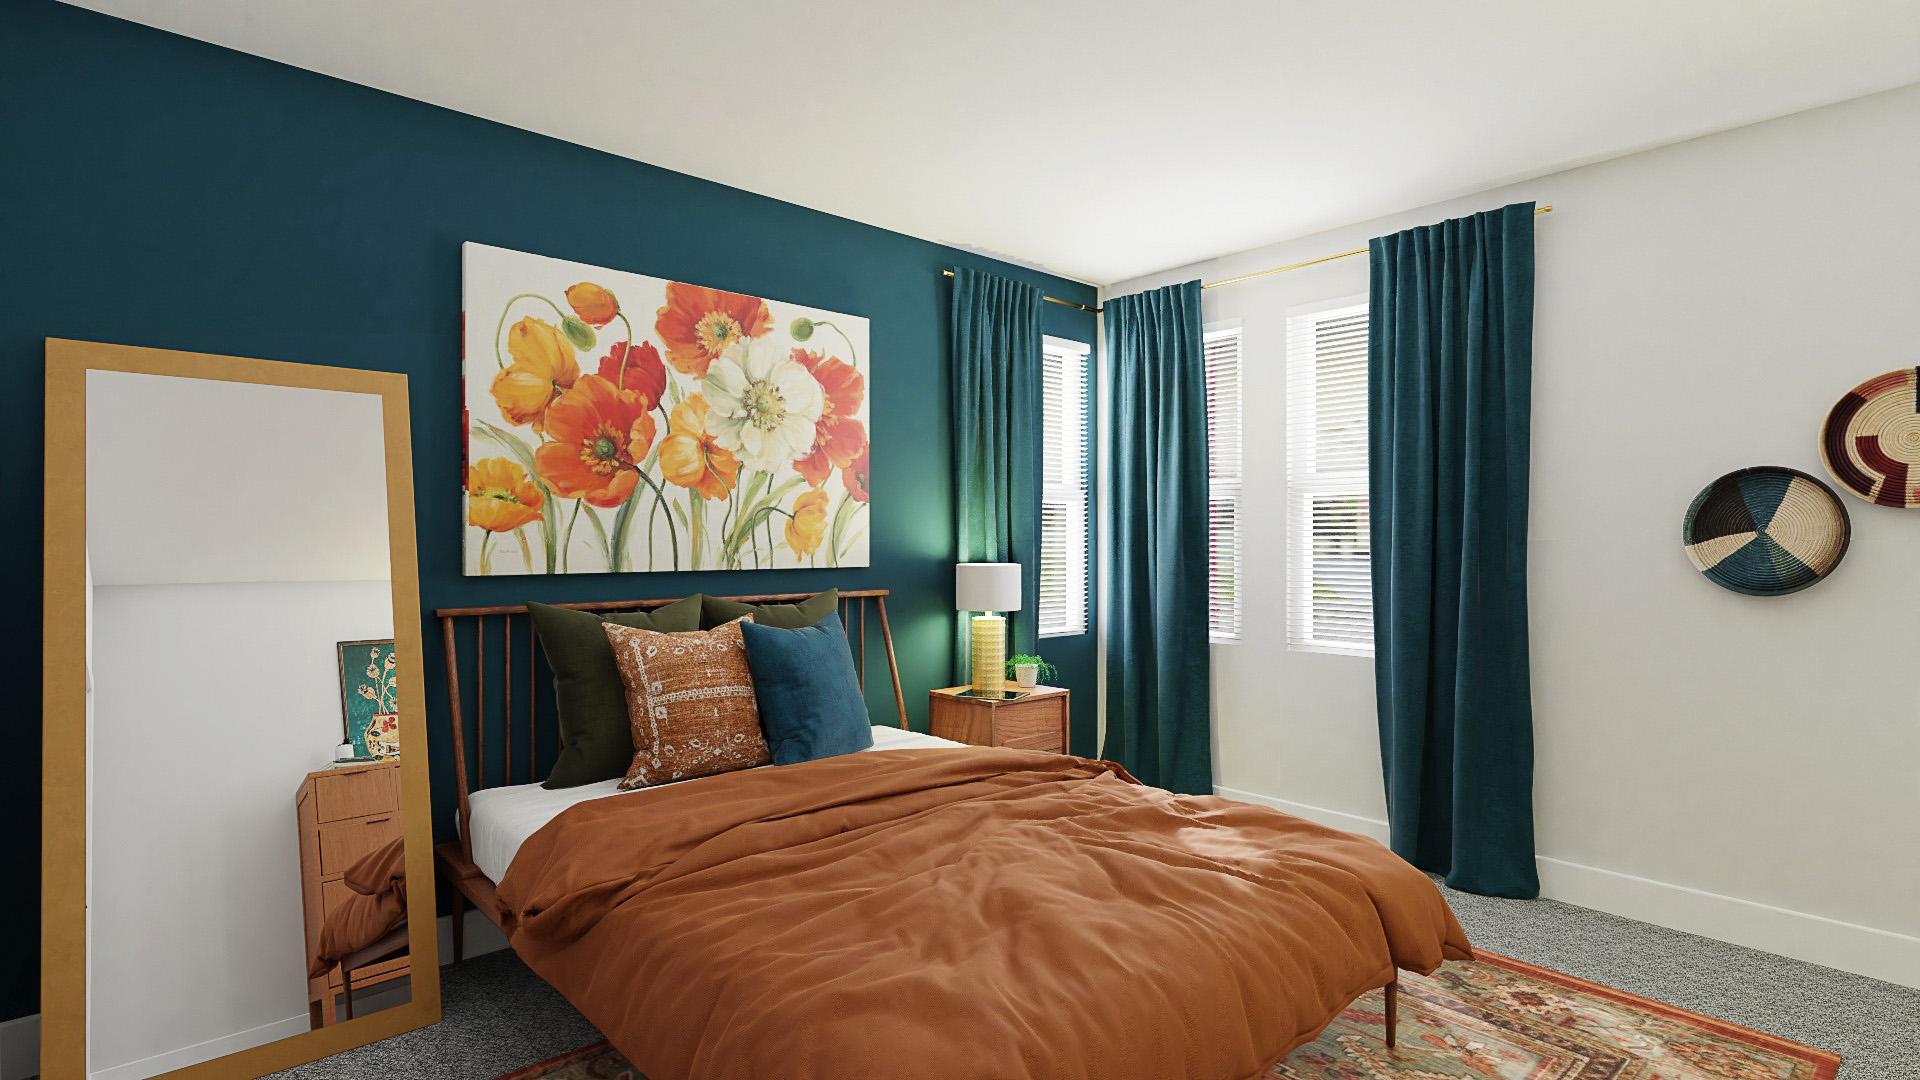 This Bold Modern-Eclectic Bedroom Is Full of Personality